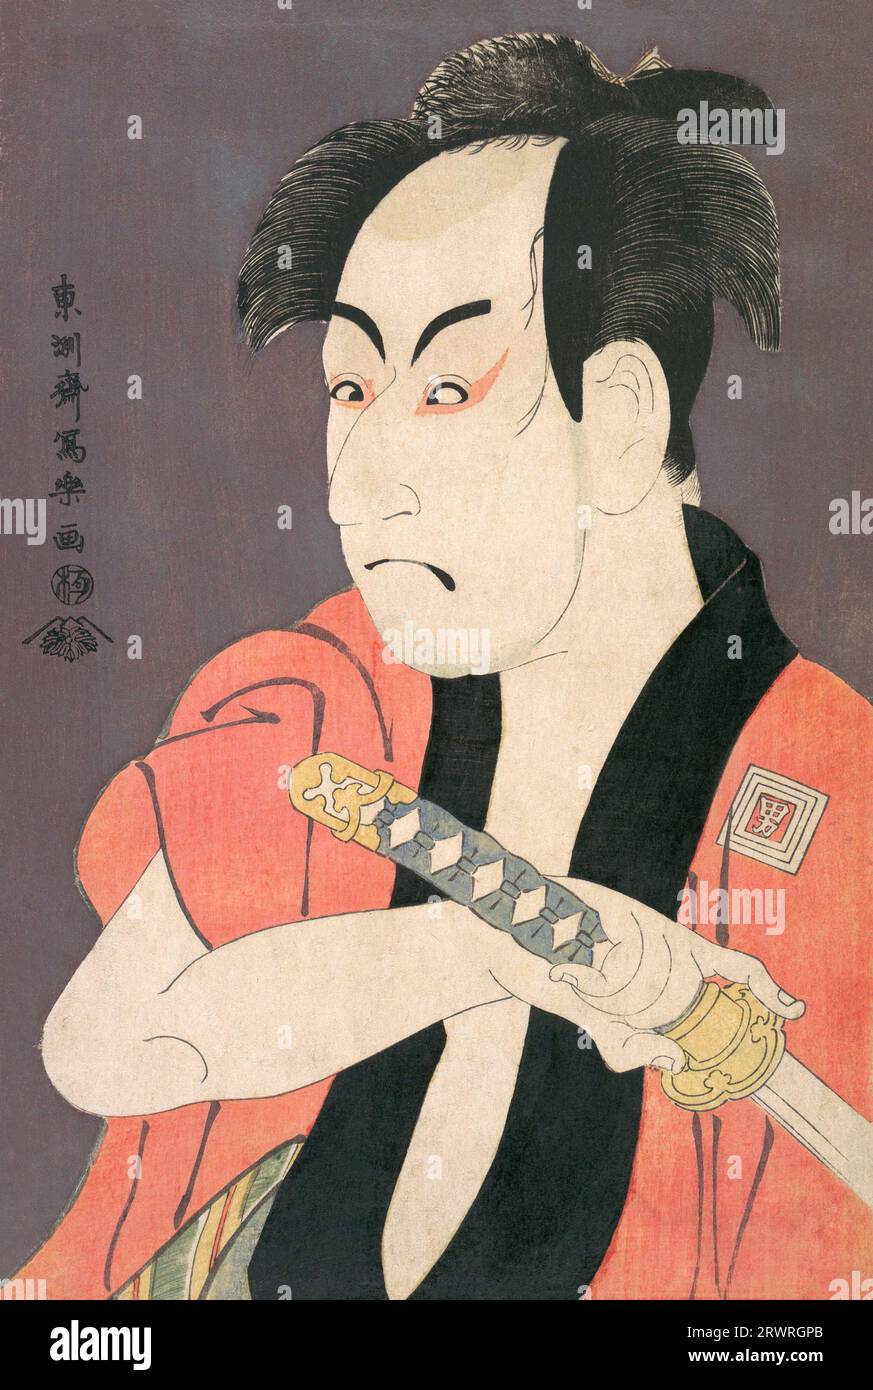 Japan: Kabuki actor Ichikawa Omezou in the role of Yakko Ippei. Ukiyo-e woodblock print by Toshusai Sharaku (1770 - 1825), c. 1794.  Tōshūsai Sharaku is widely considered to be one of the great masters of the woodblock printing in Japan. Little is known of him, besides his ukiyo-e prints; neither his true name nor the dates of his birth or death are known with any certainty. His active career as a woodblock artist seems to have spanned just ten months in the mid-Edo period of Japanese history, from the middle of 1794 to early 1795. Stock Photo